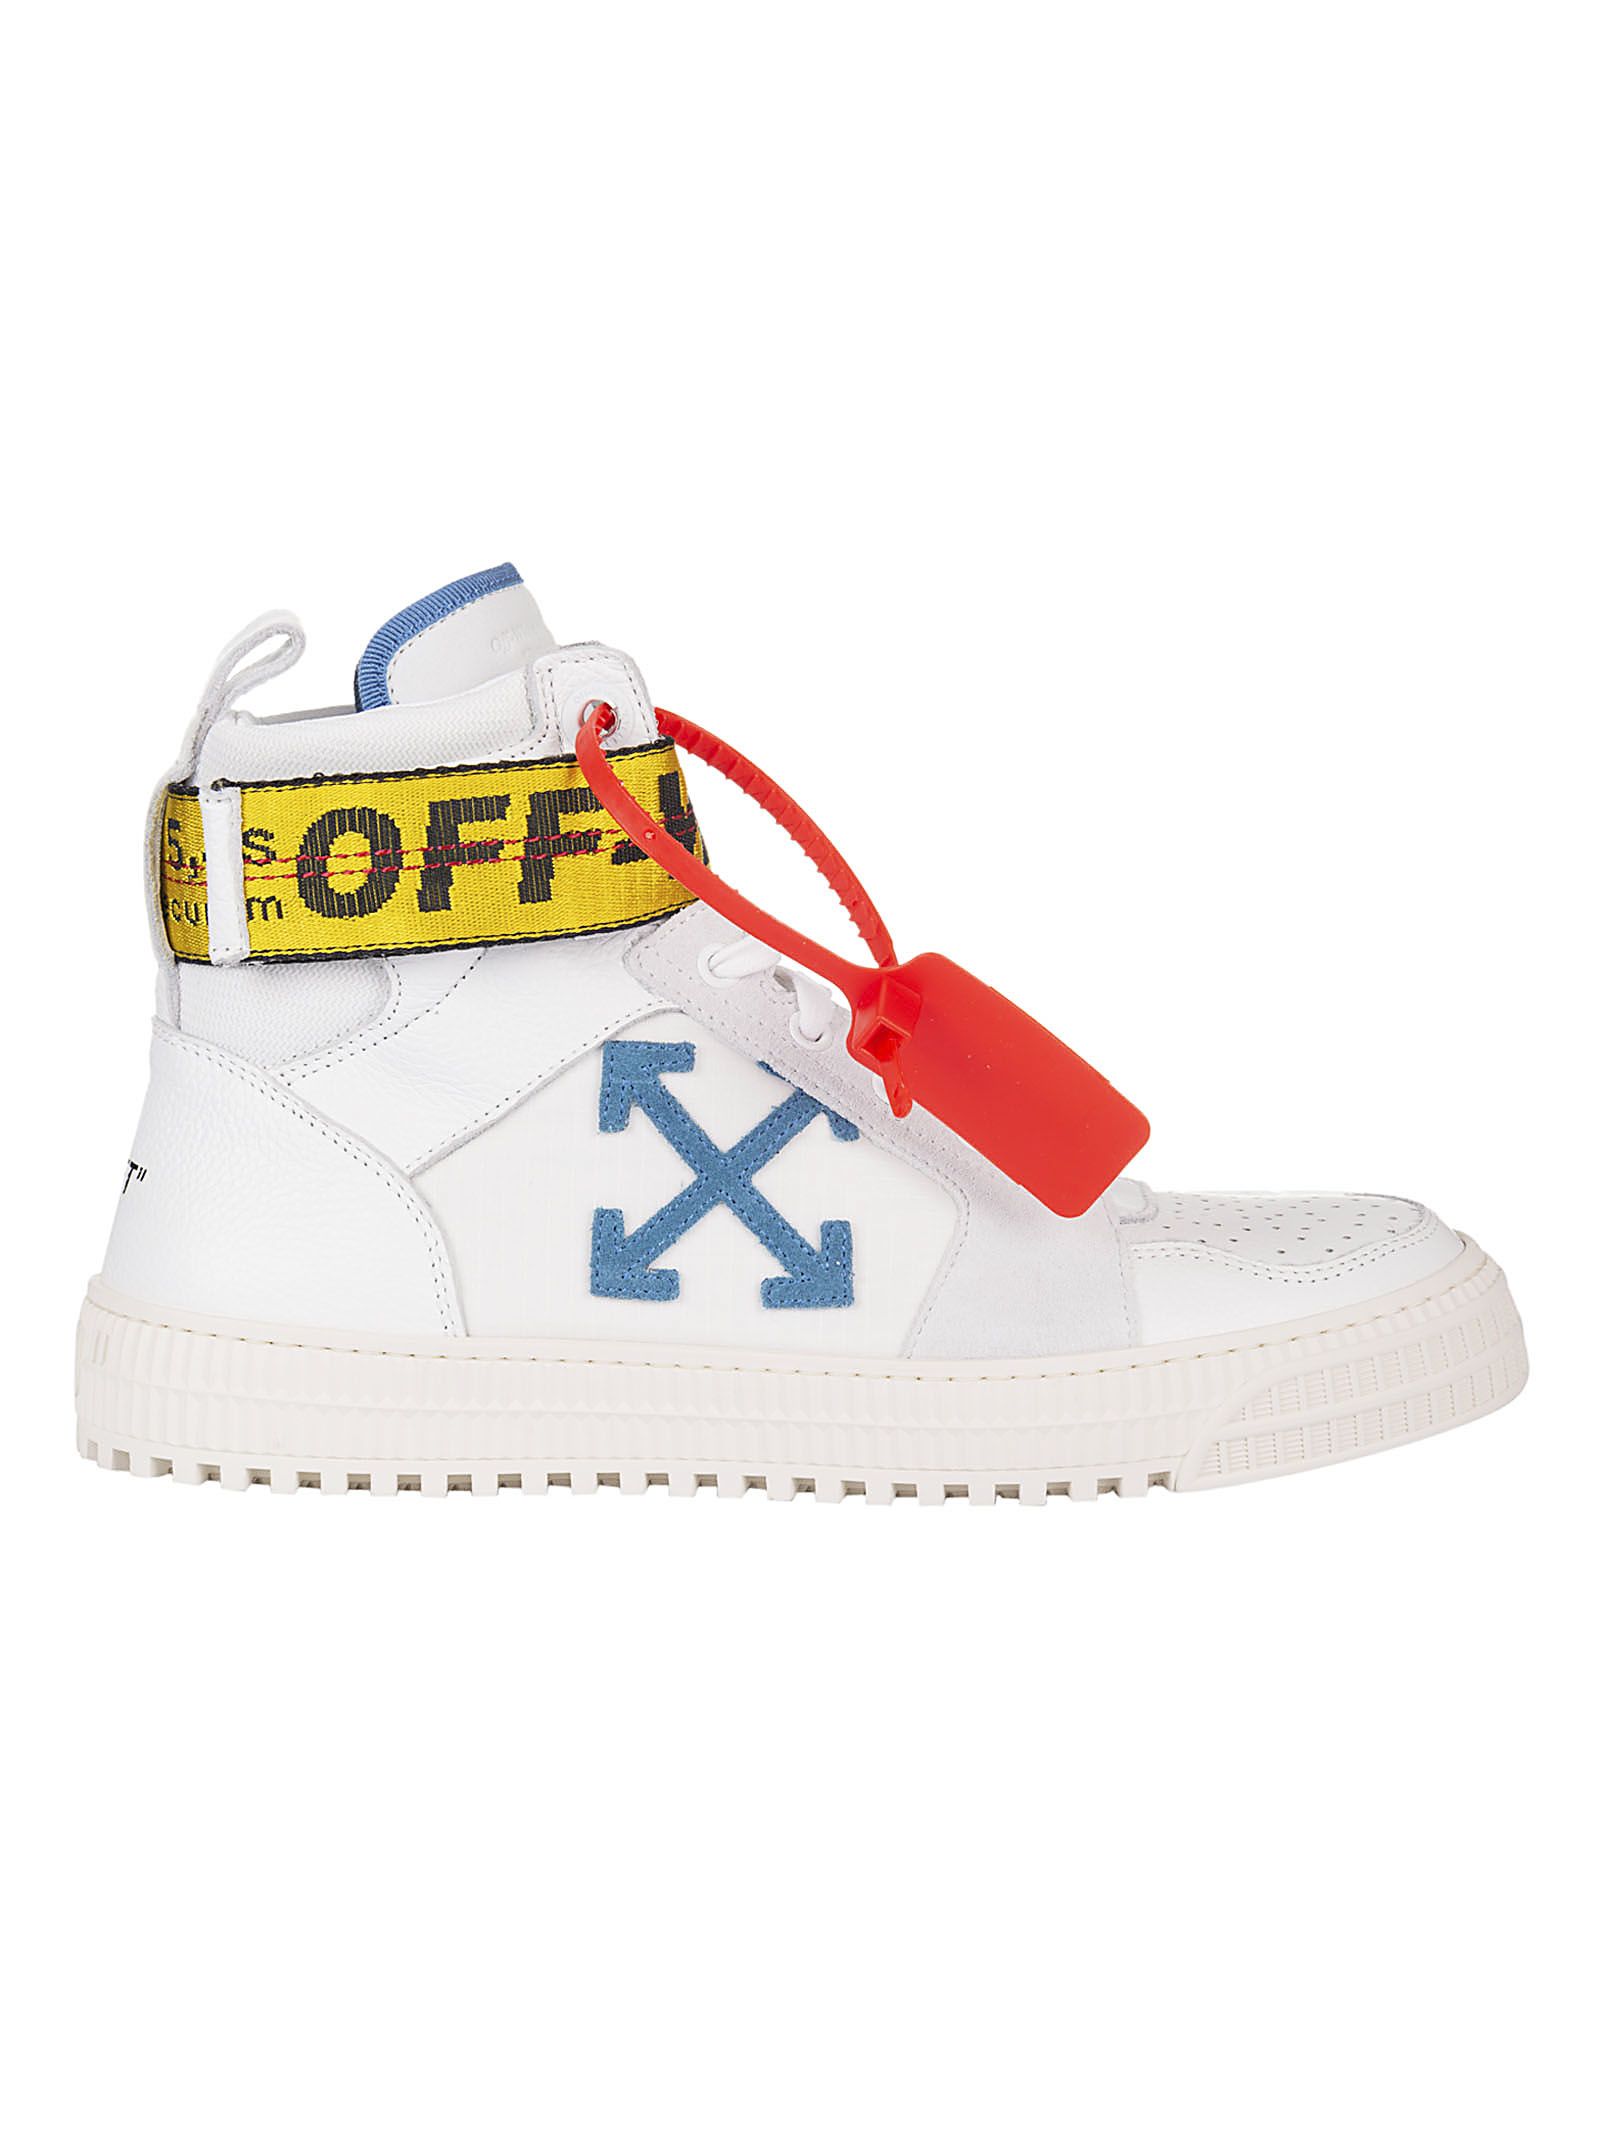 off white high tops blue